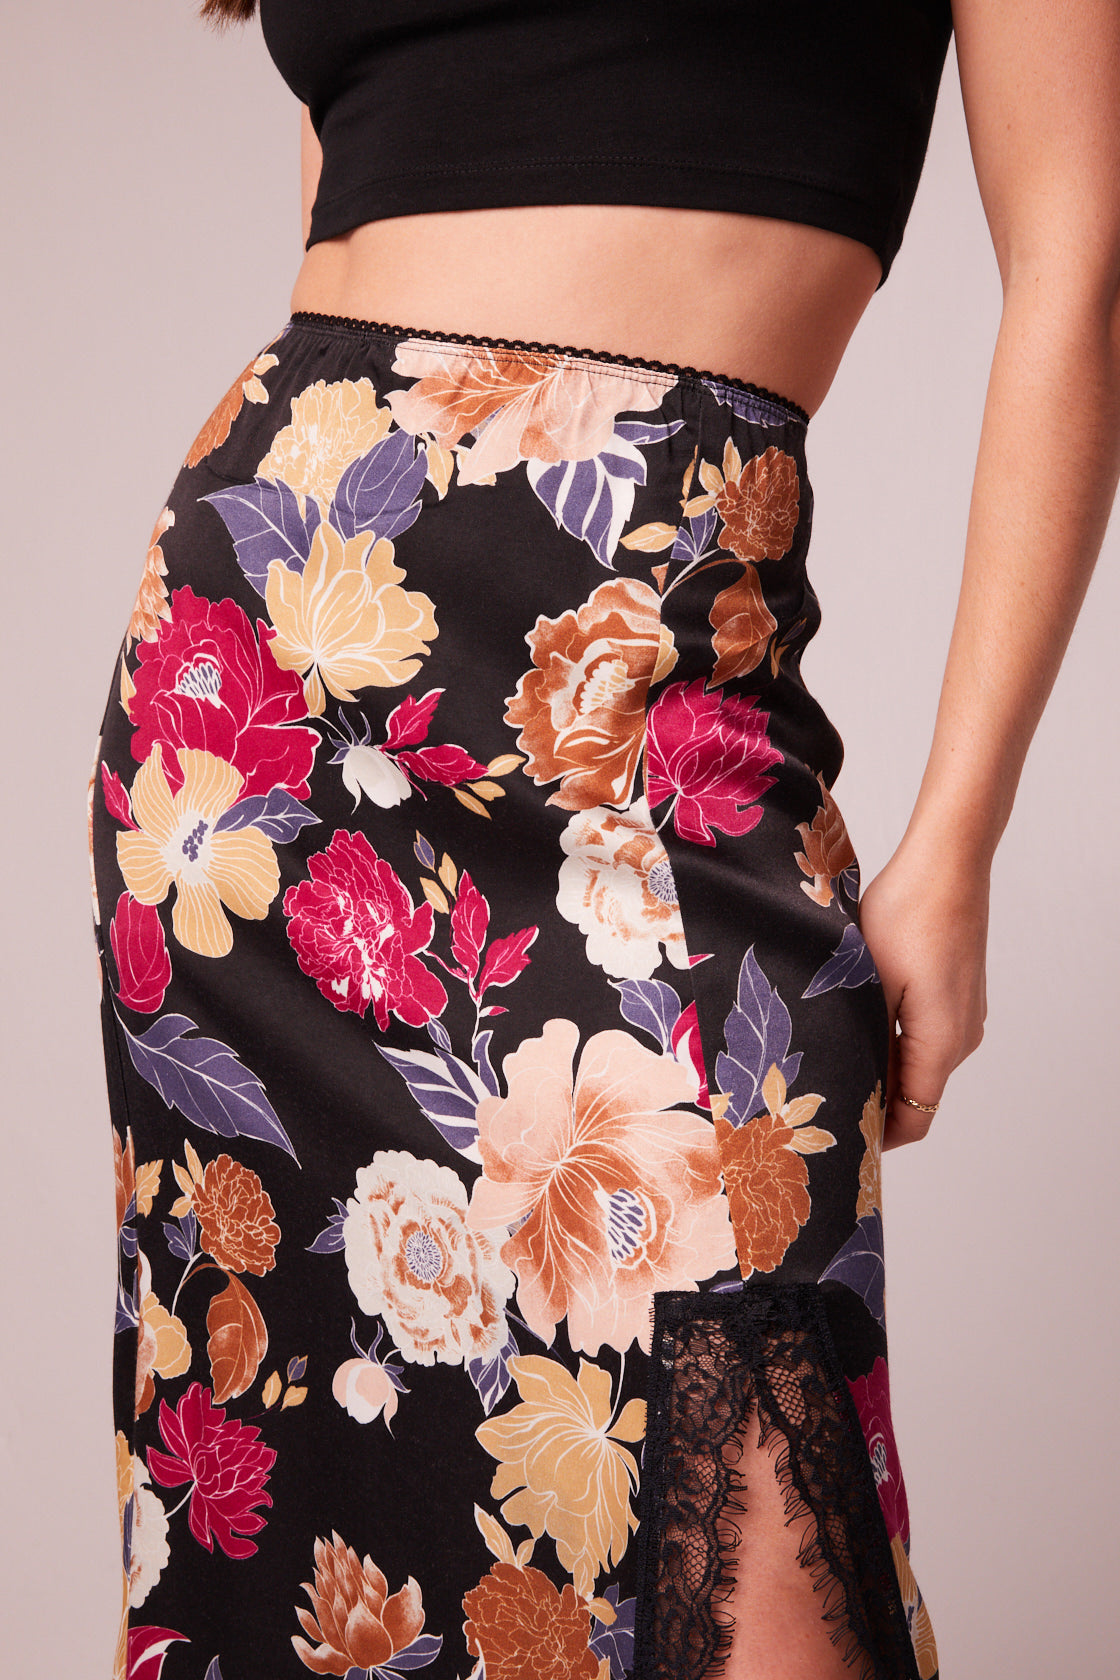 Lilou Black Floral Lace Slip Midi Skirt - band of the free